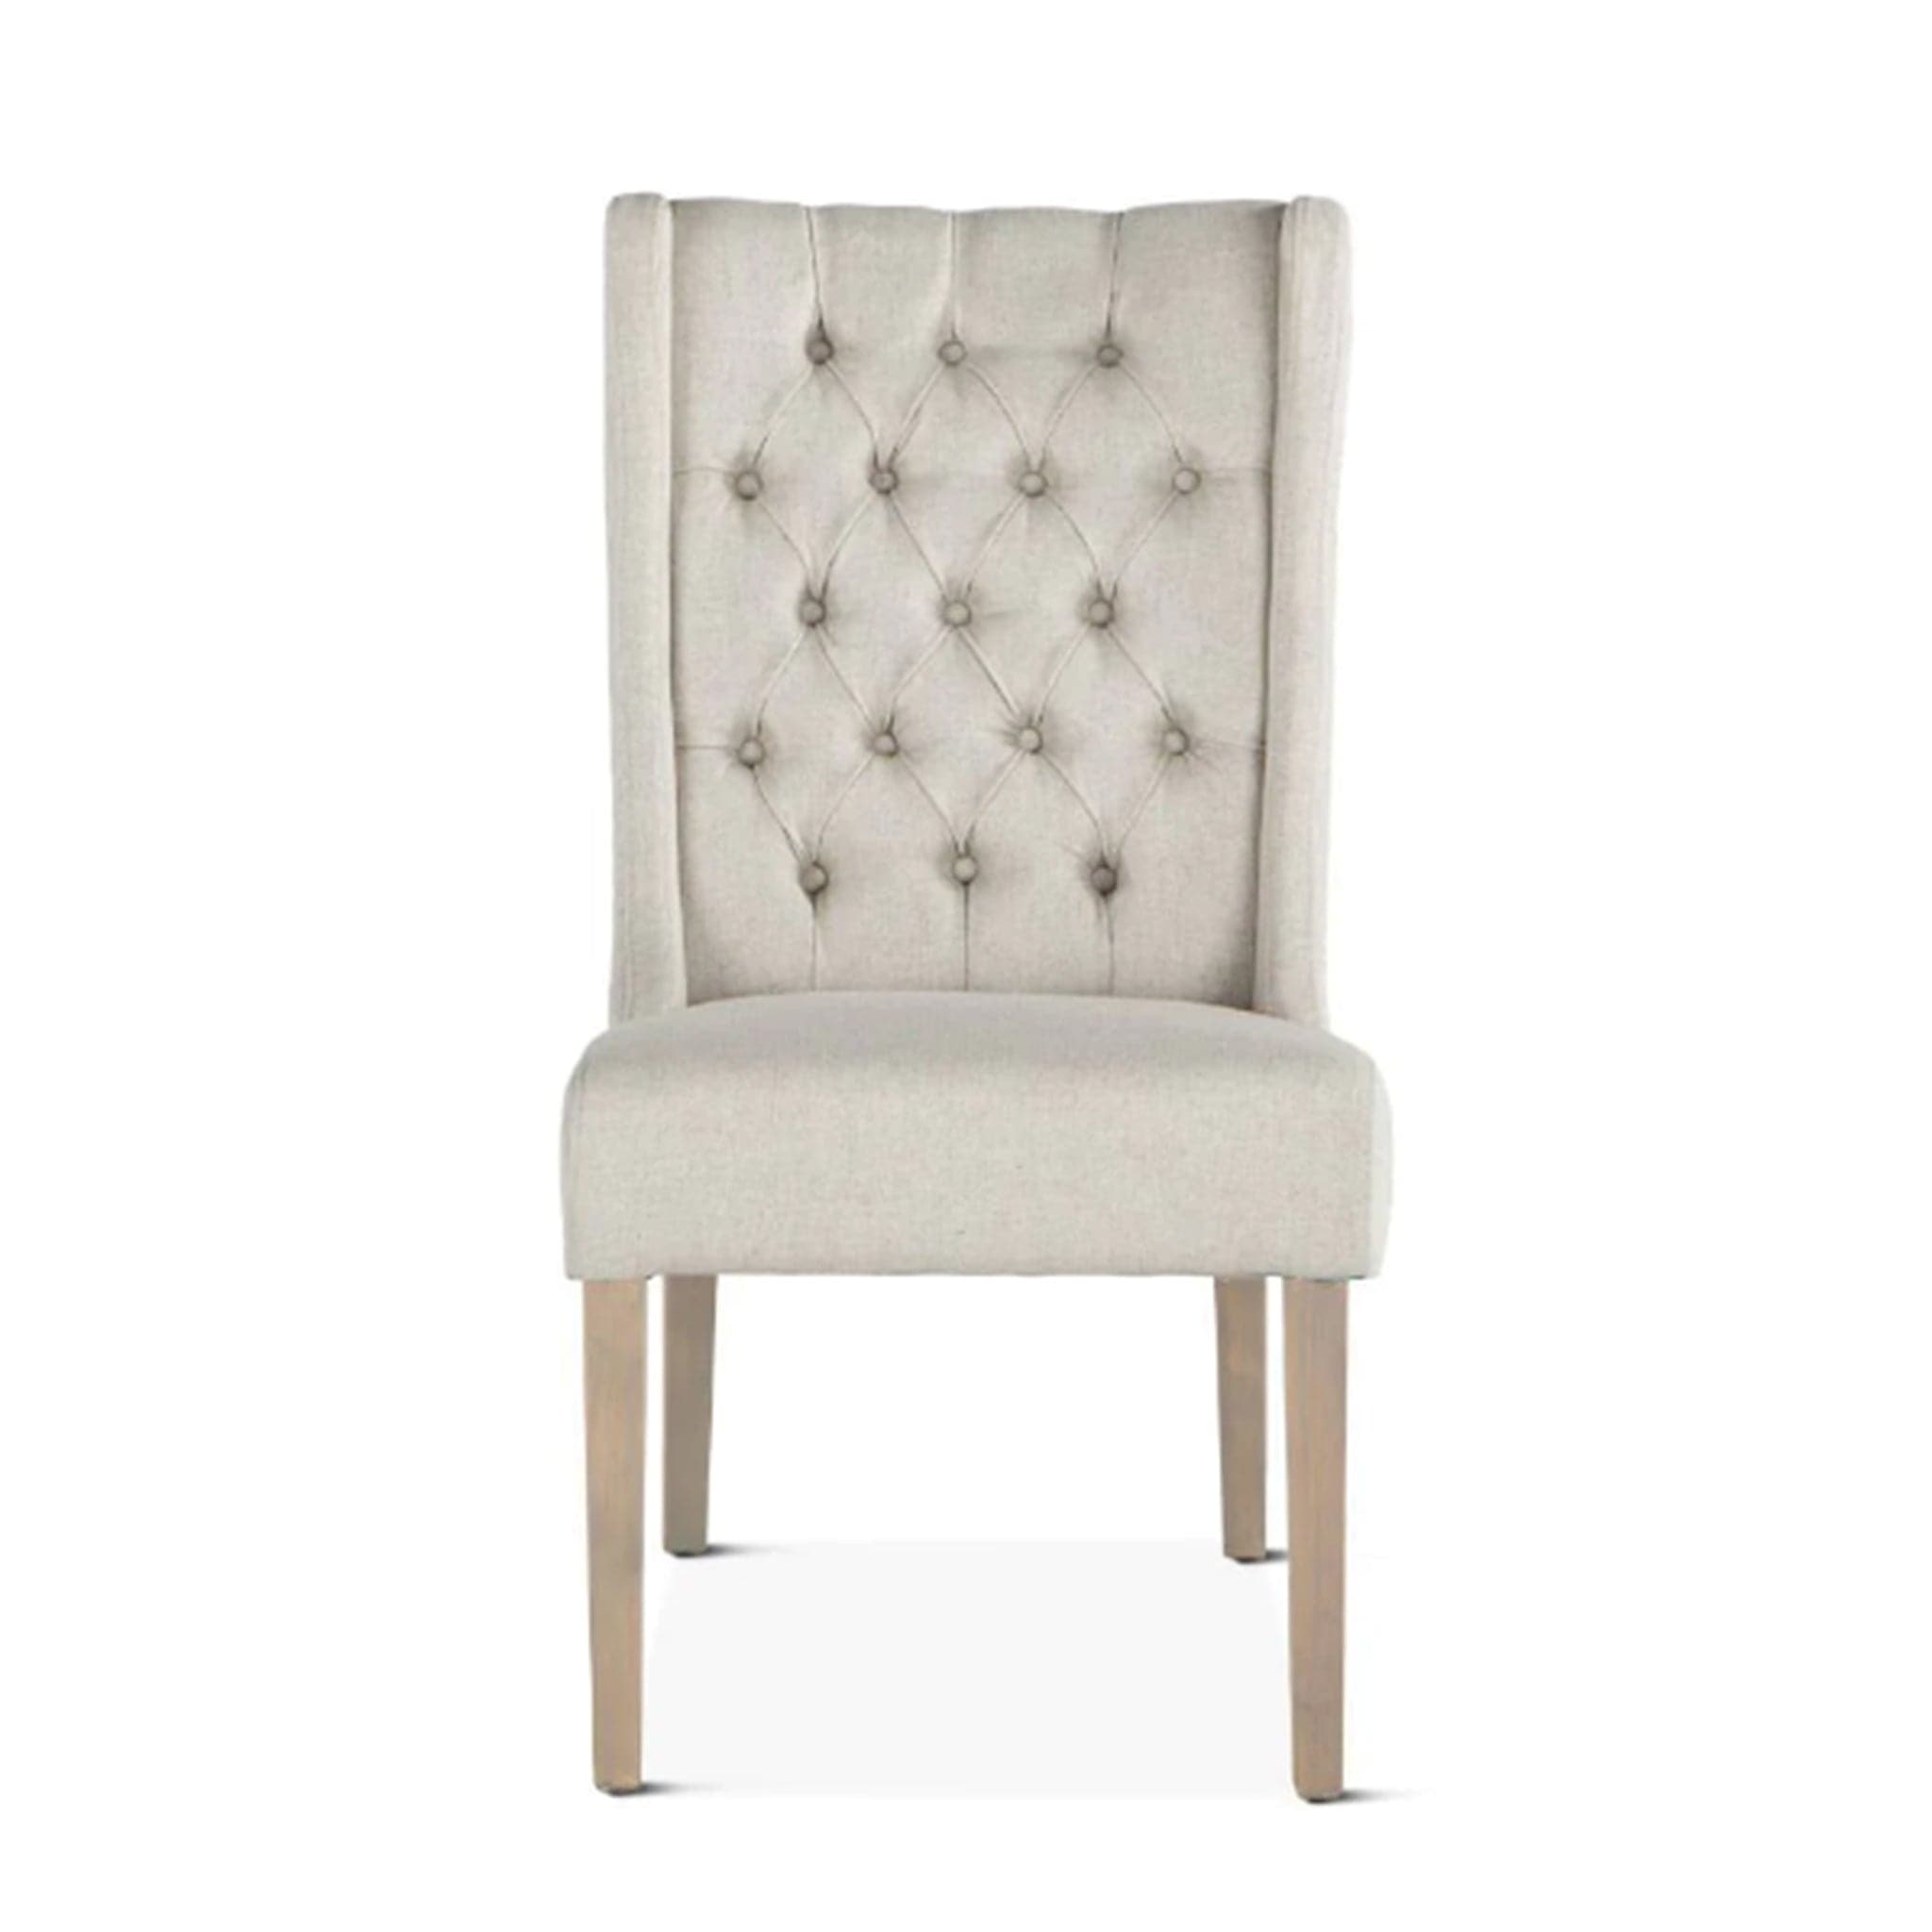 Chloe Dining Chairs with Napoleon Legs, Set of 2